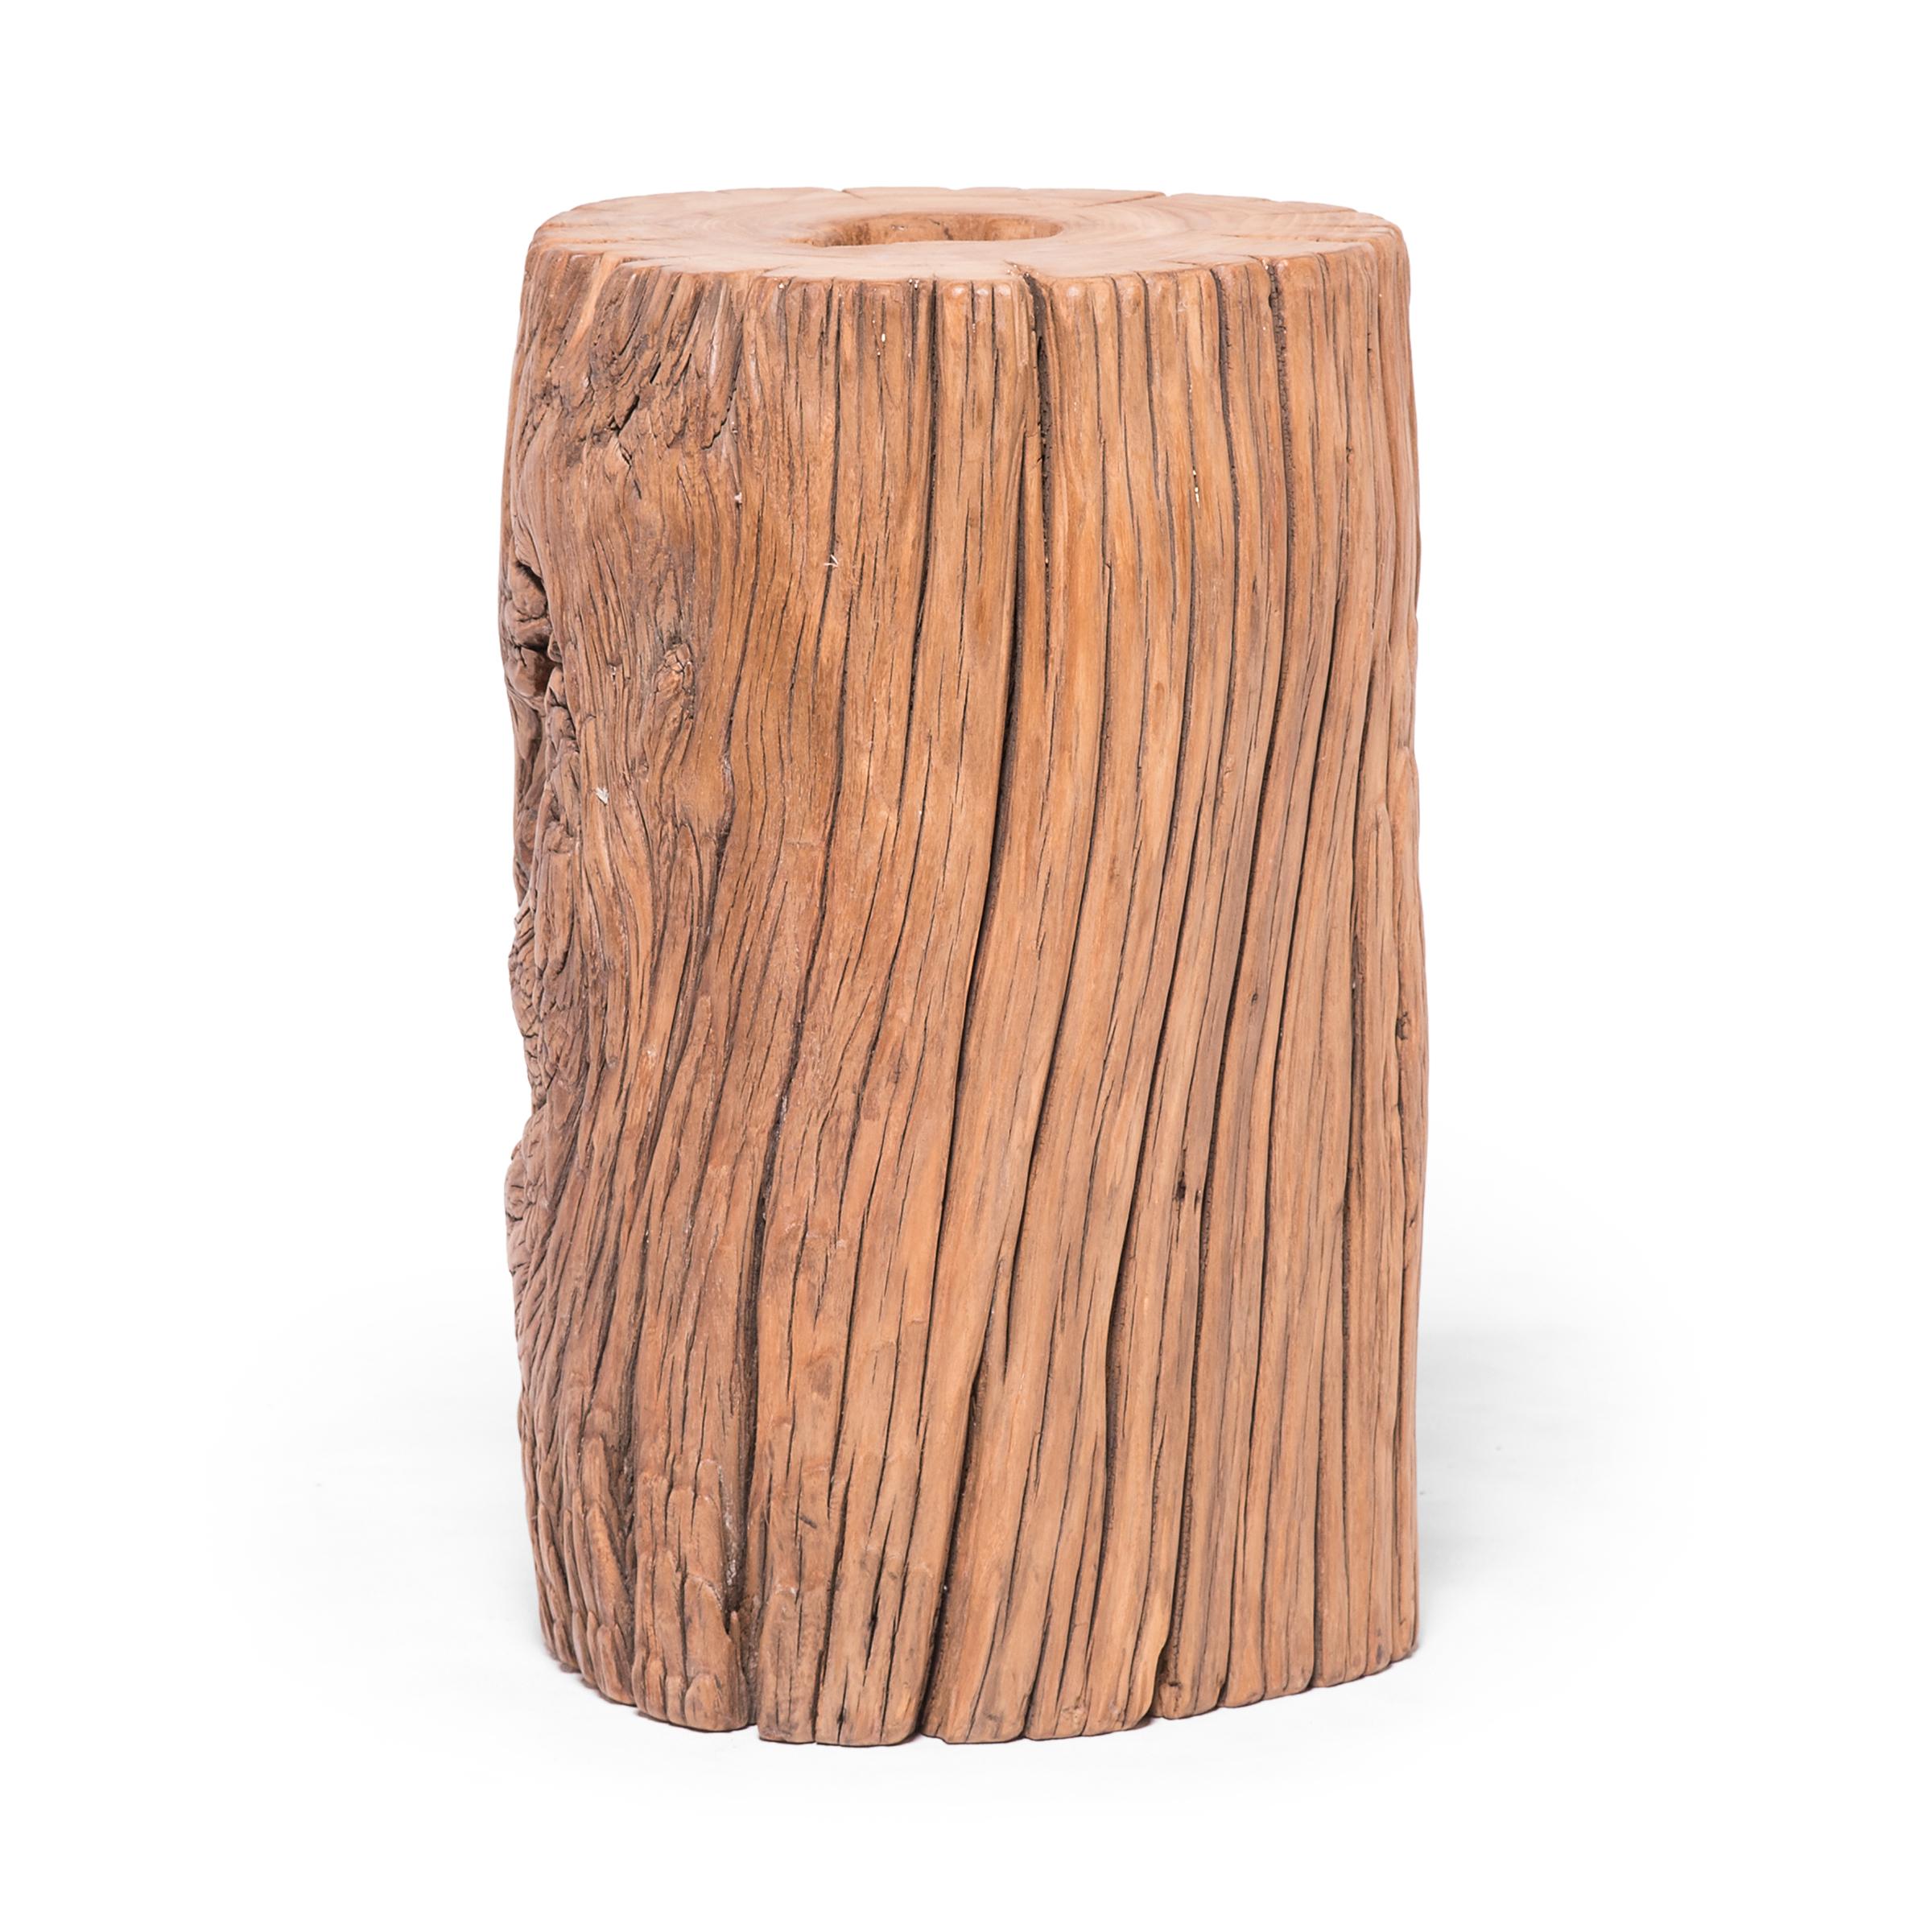 This beautifully weathered piece of elmwood is actually a portion of a support beam that once bolstered a Qing-dynasty building. A beautiful cross-section showcases the timber's growth rings, and a century of weathering has cloaked the wood's raw